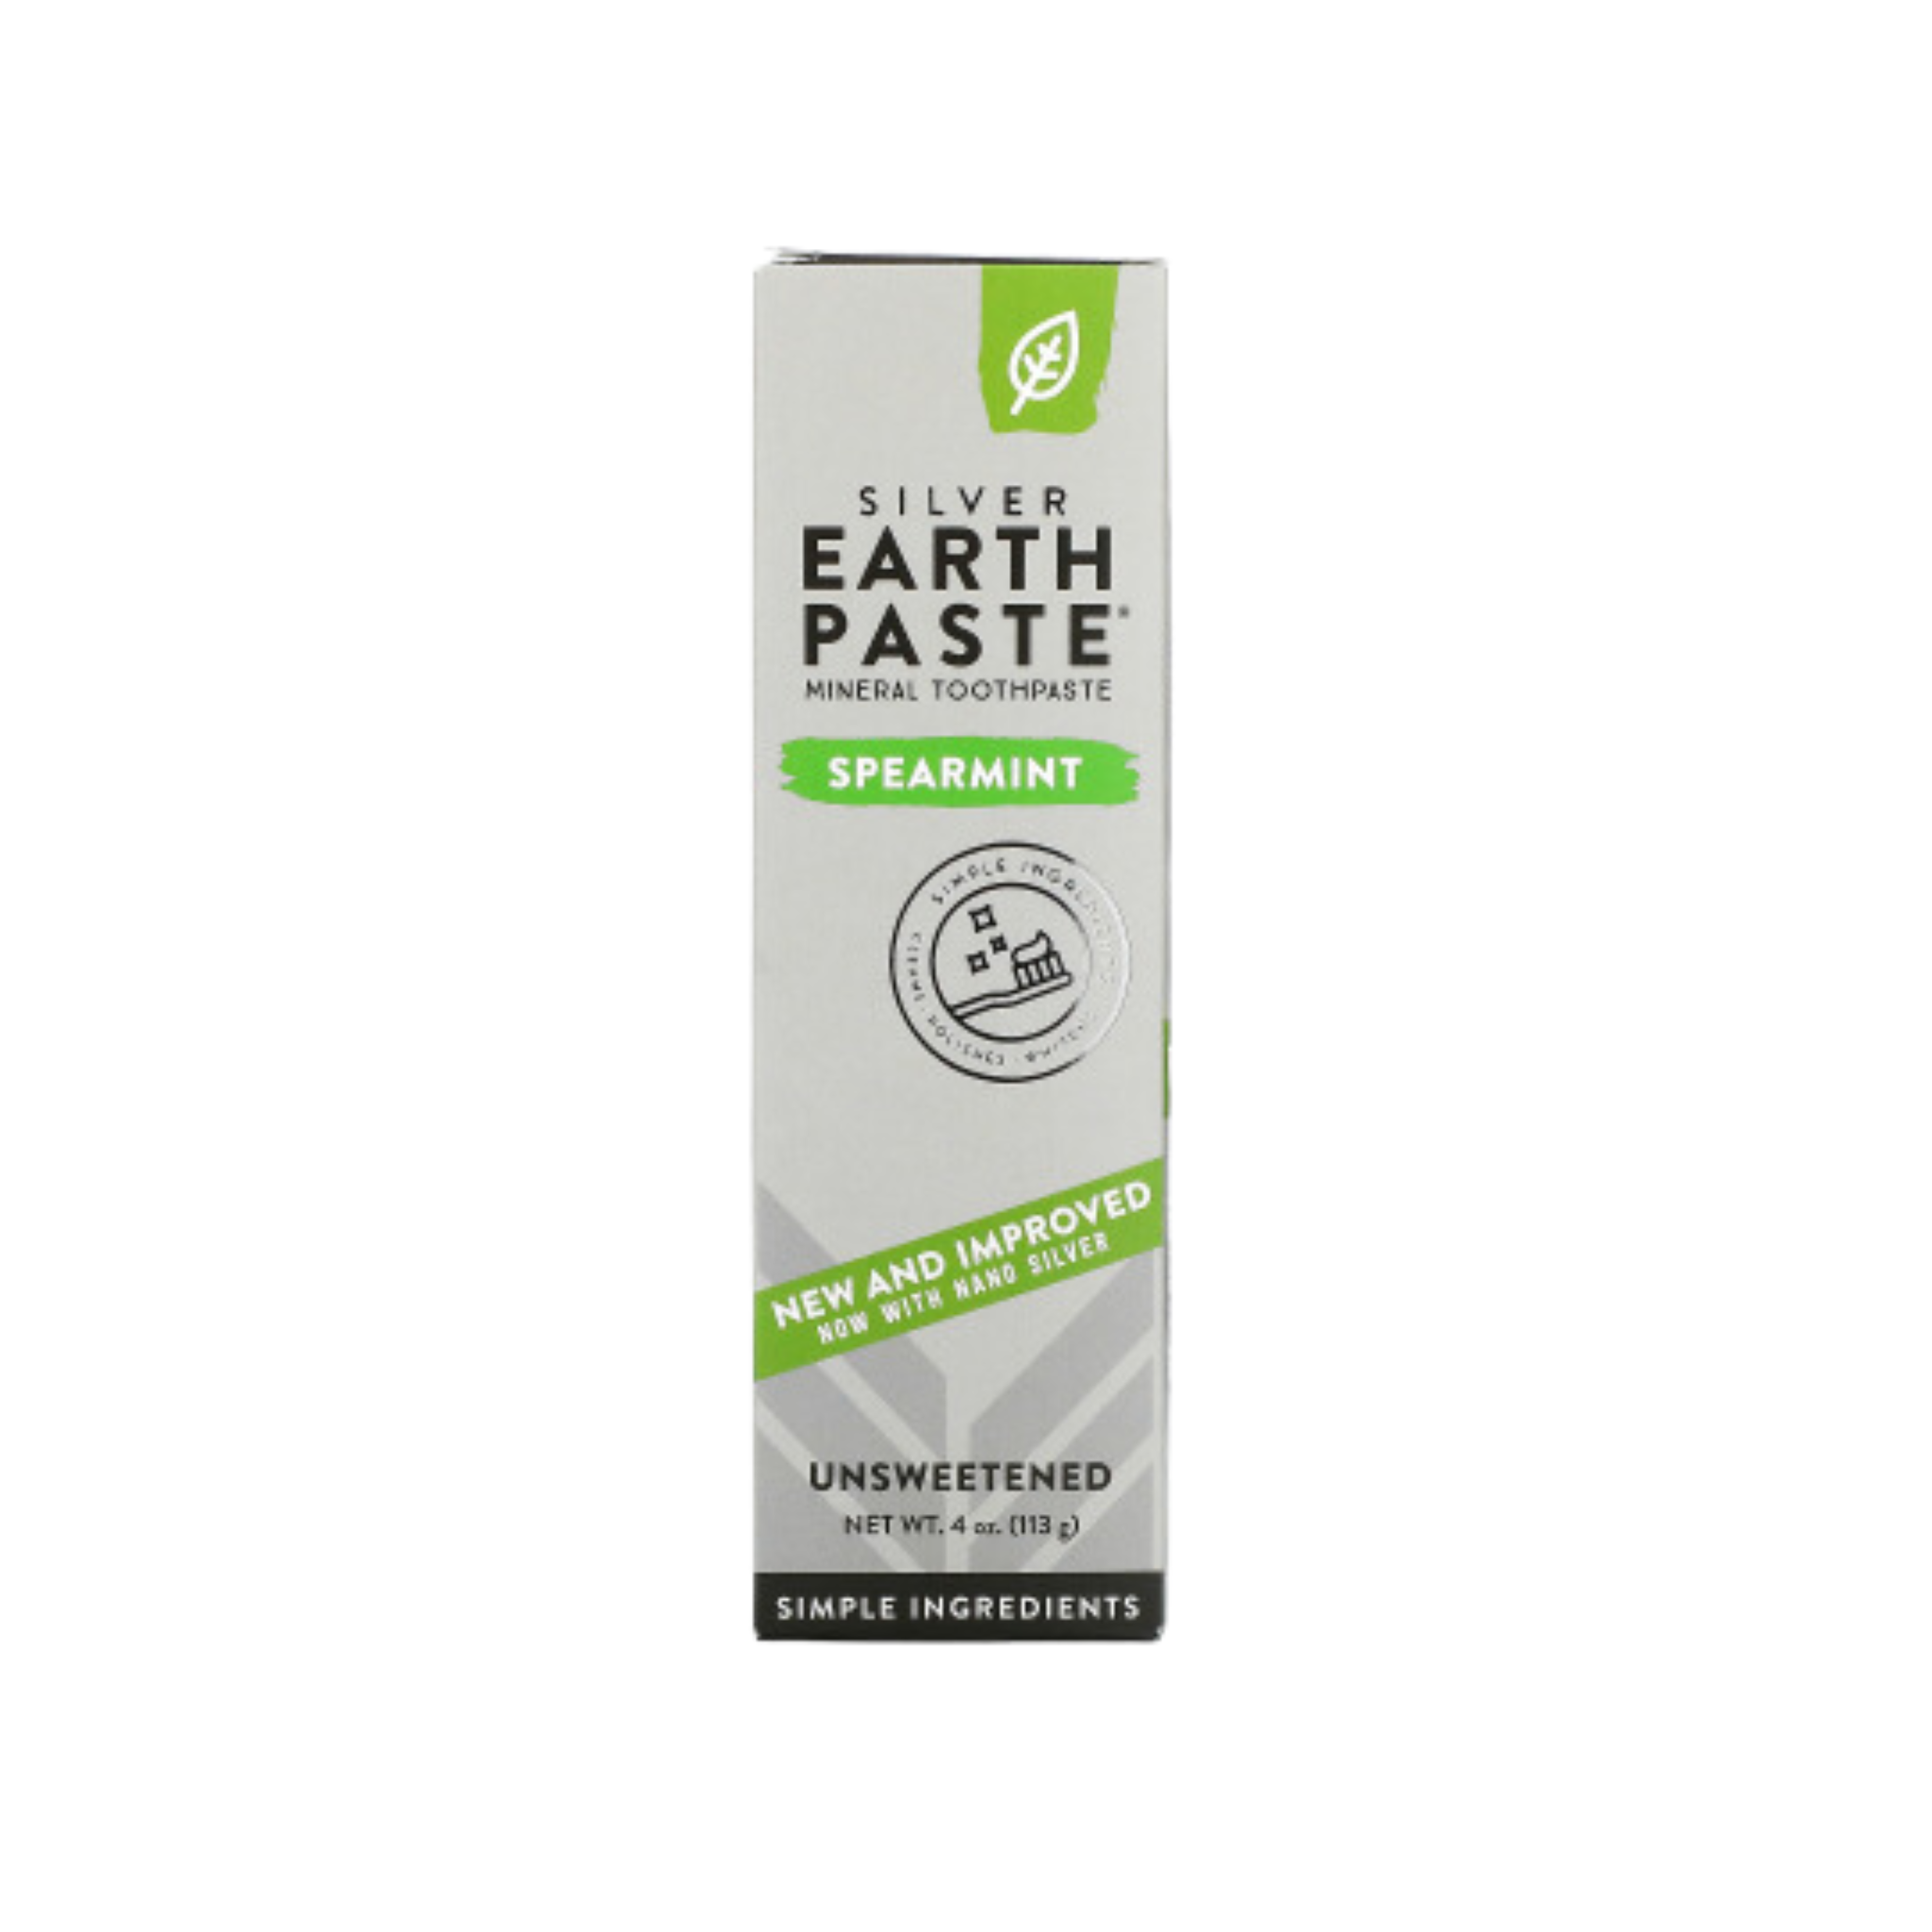 Silver Earth Paste Mineral Toothpaste Unsweetened Spearmint 4 oz